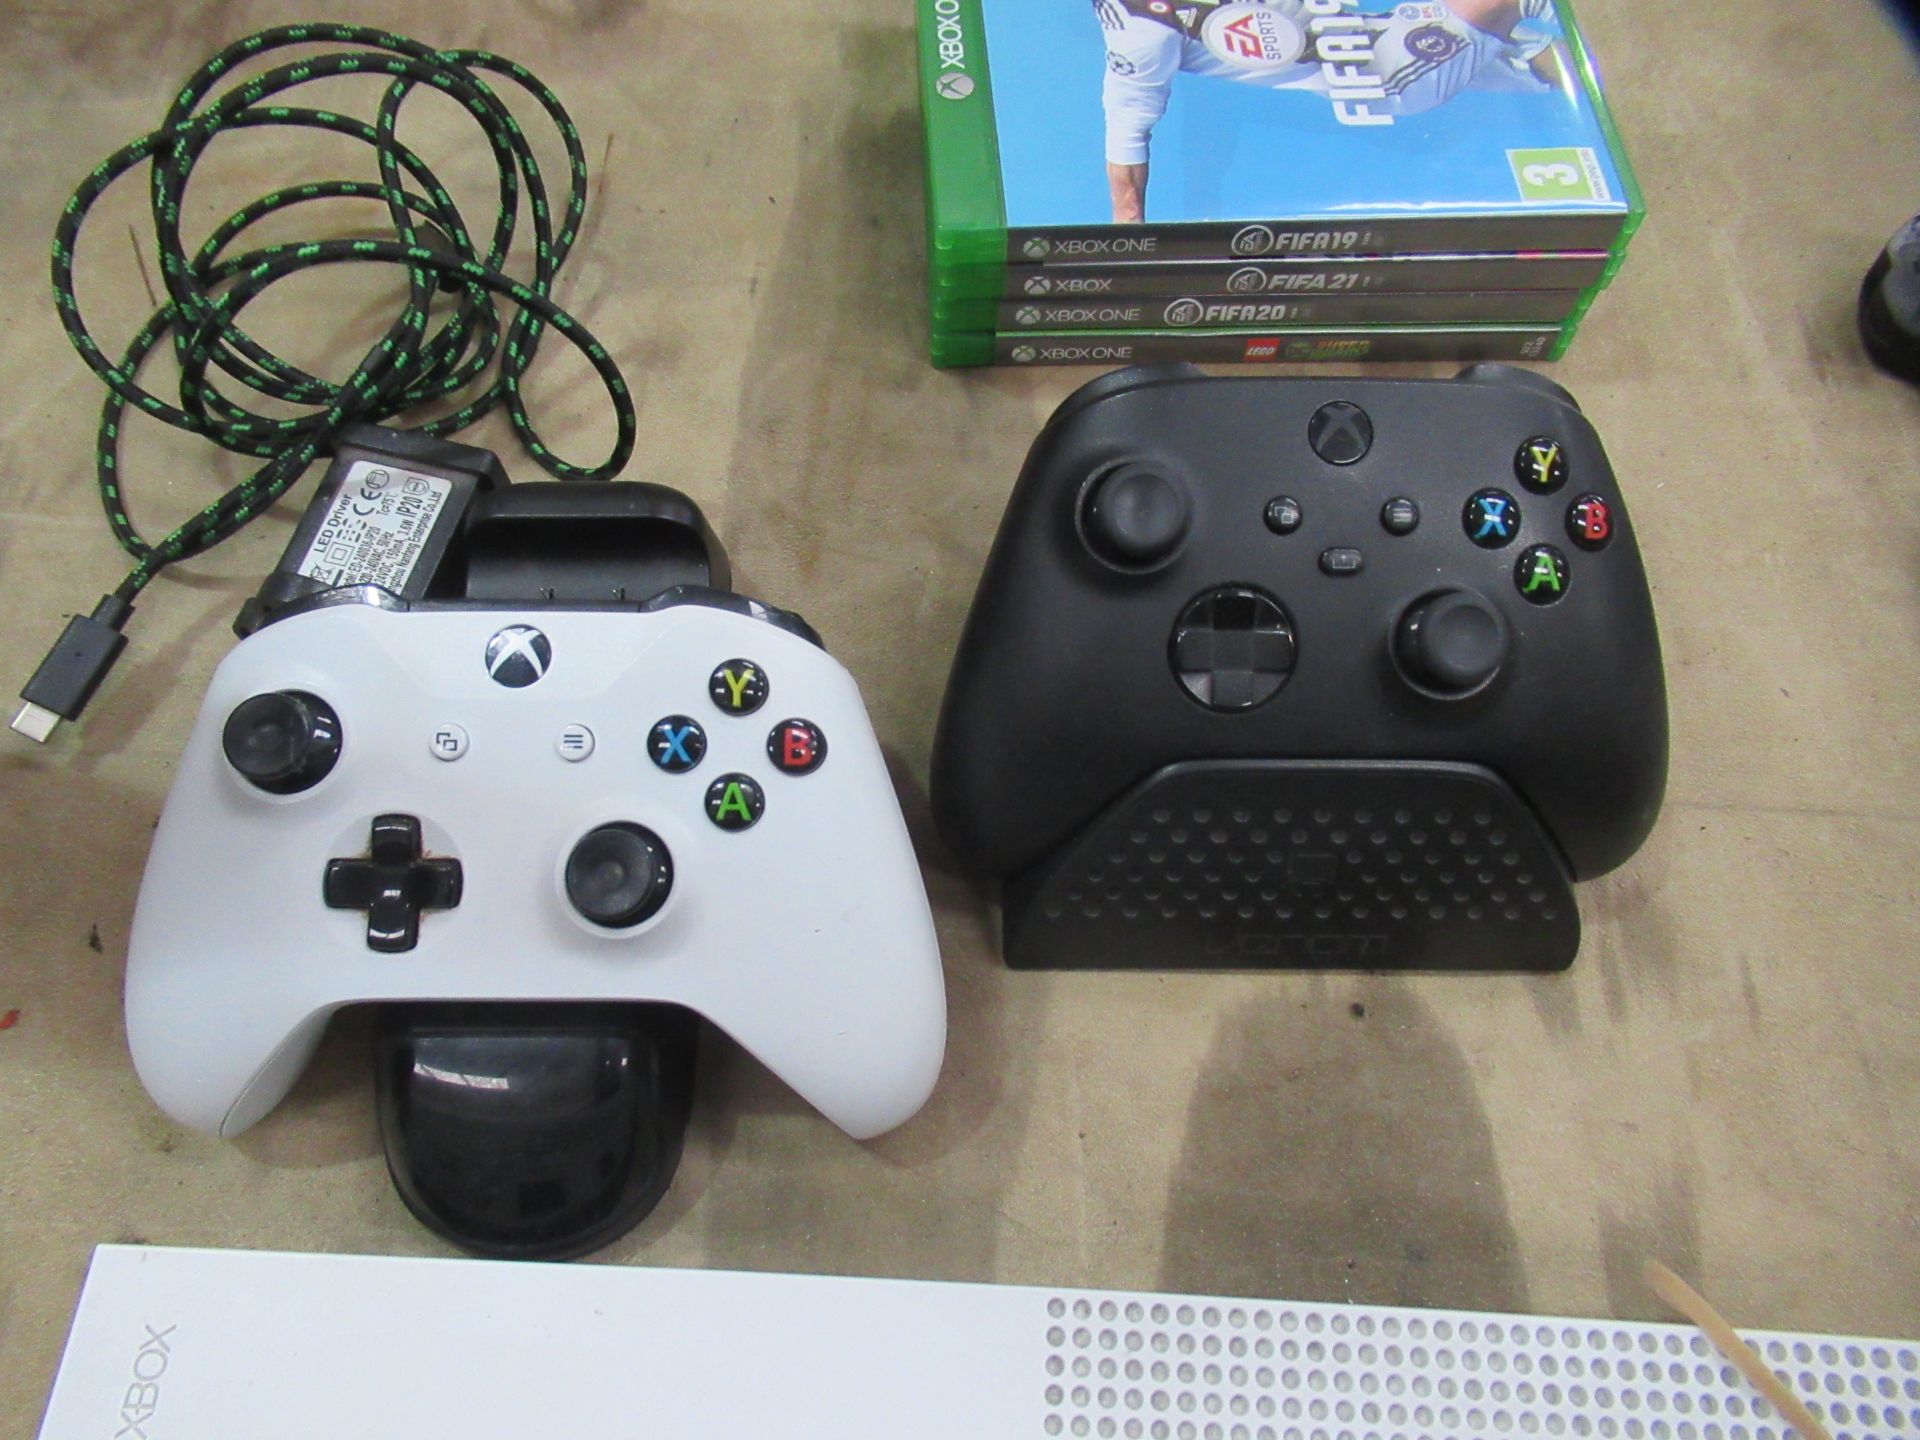 Xbox One S Gaming System and Accessories - Image 2 of 3